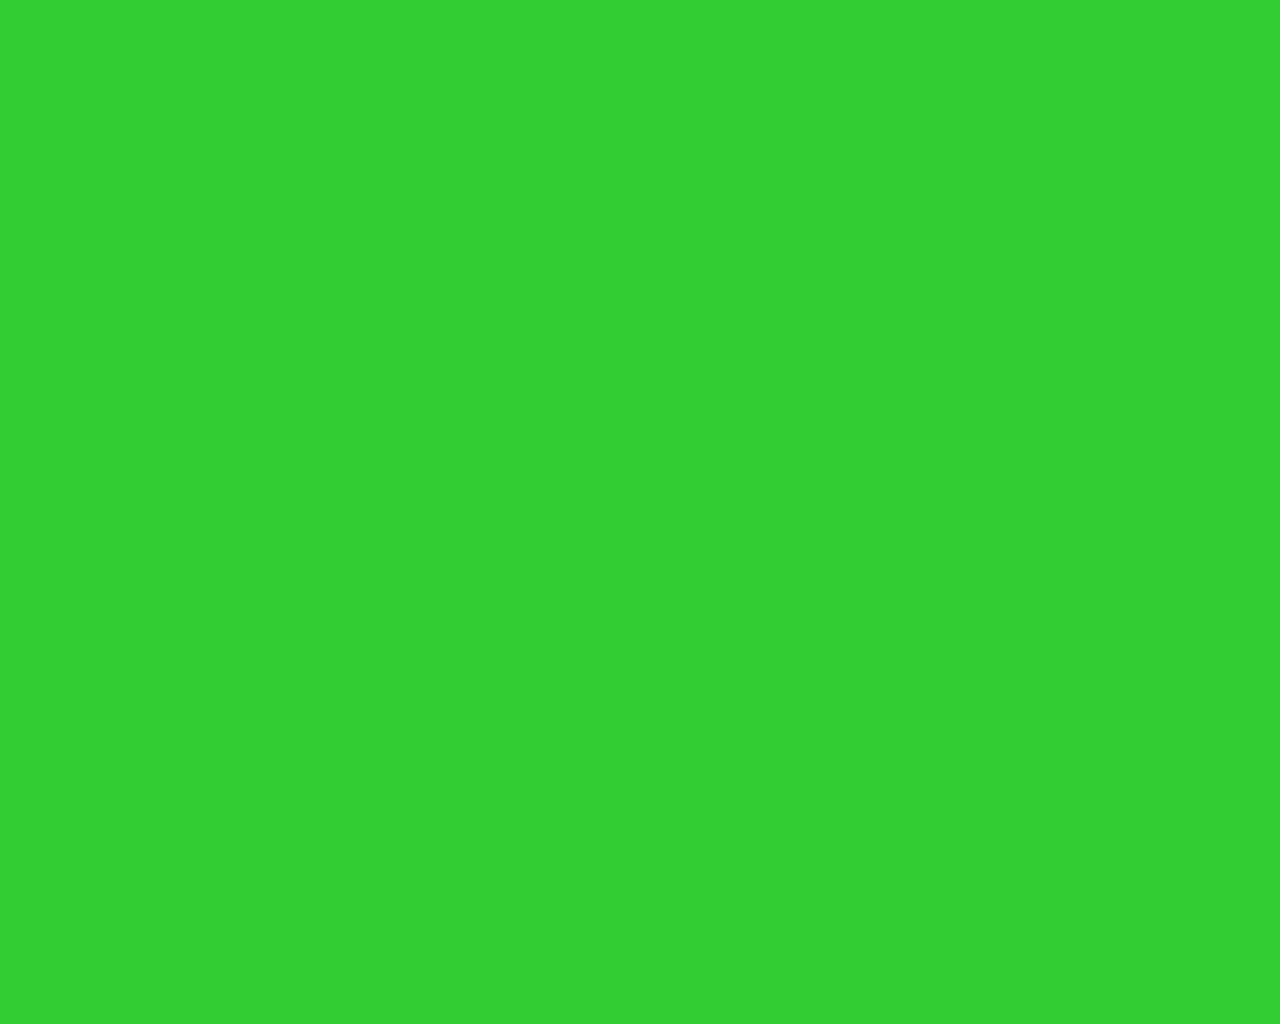 Solid Colors Green HD Wallpaper, Background Image